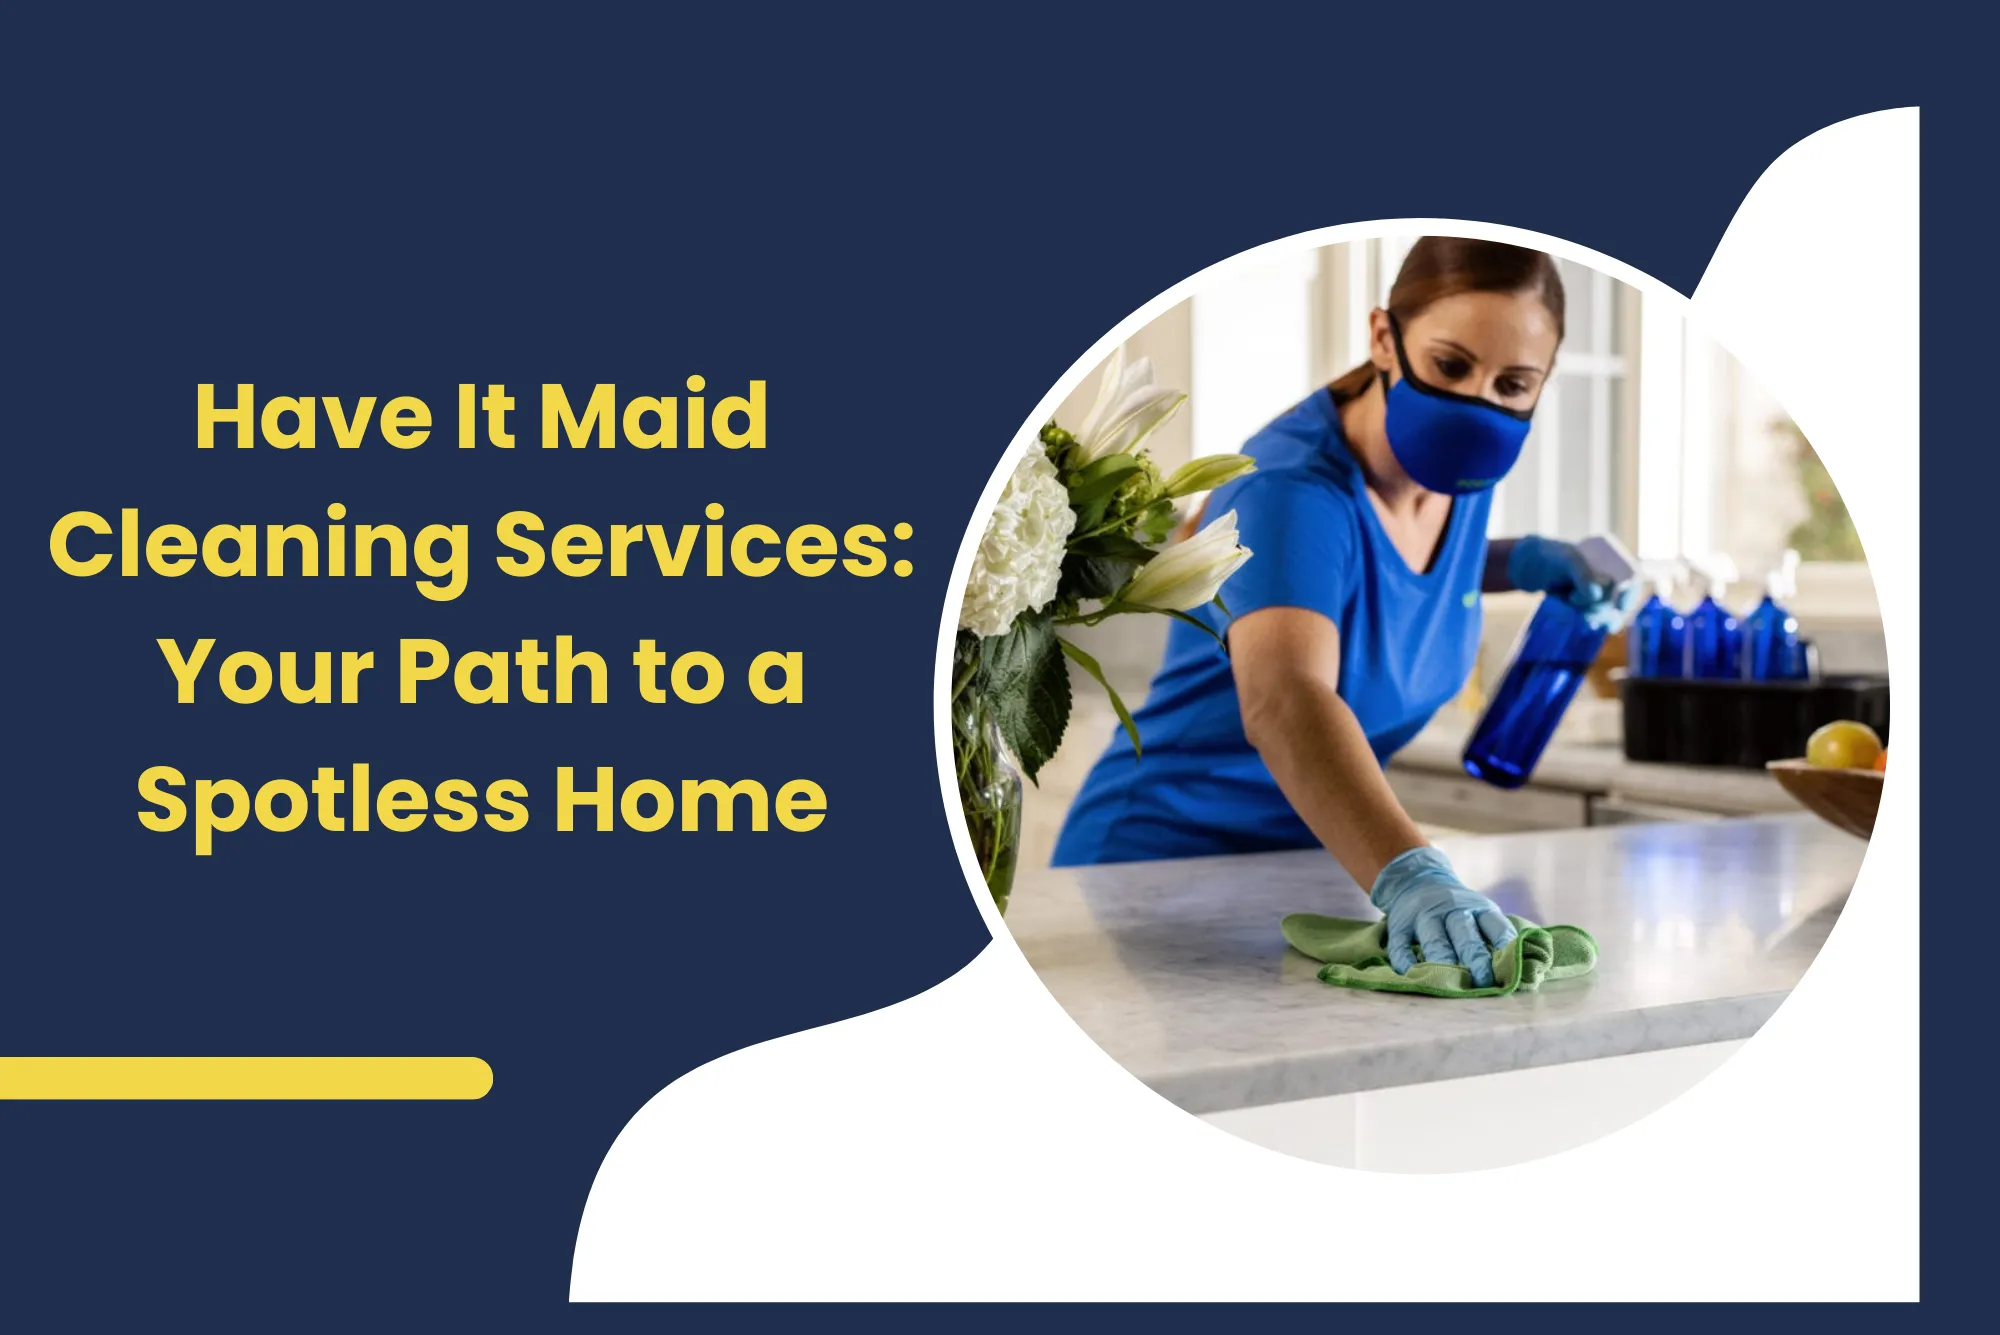 Have It Maid Cleaning Services Your Path to a Spotless Home